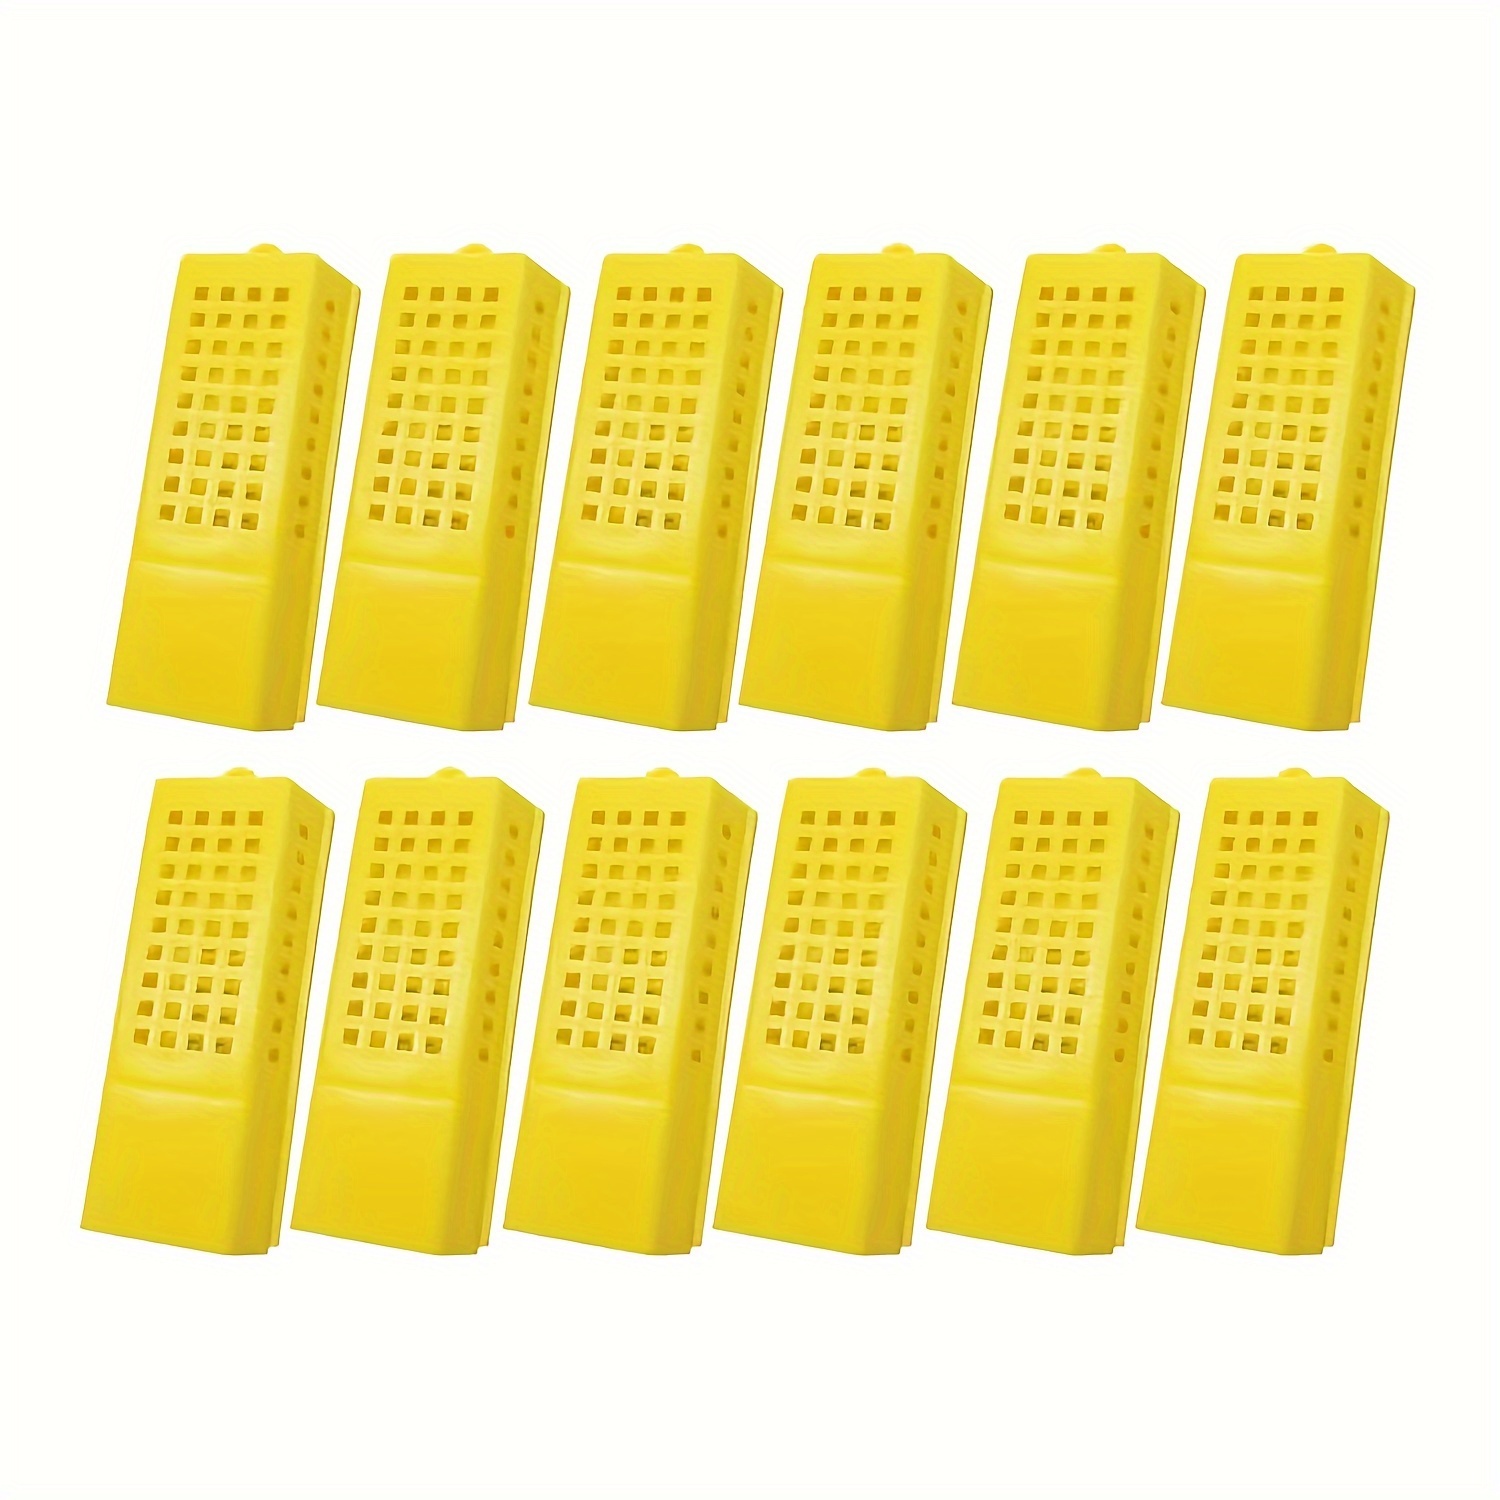 

12pcs, Plastic Queen Bee Cages Transporting Catcher Beekeeping Supplies Rearing Cup Kit Transporting Catcher Insectary Box Beekeeper Equipment Tool